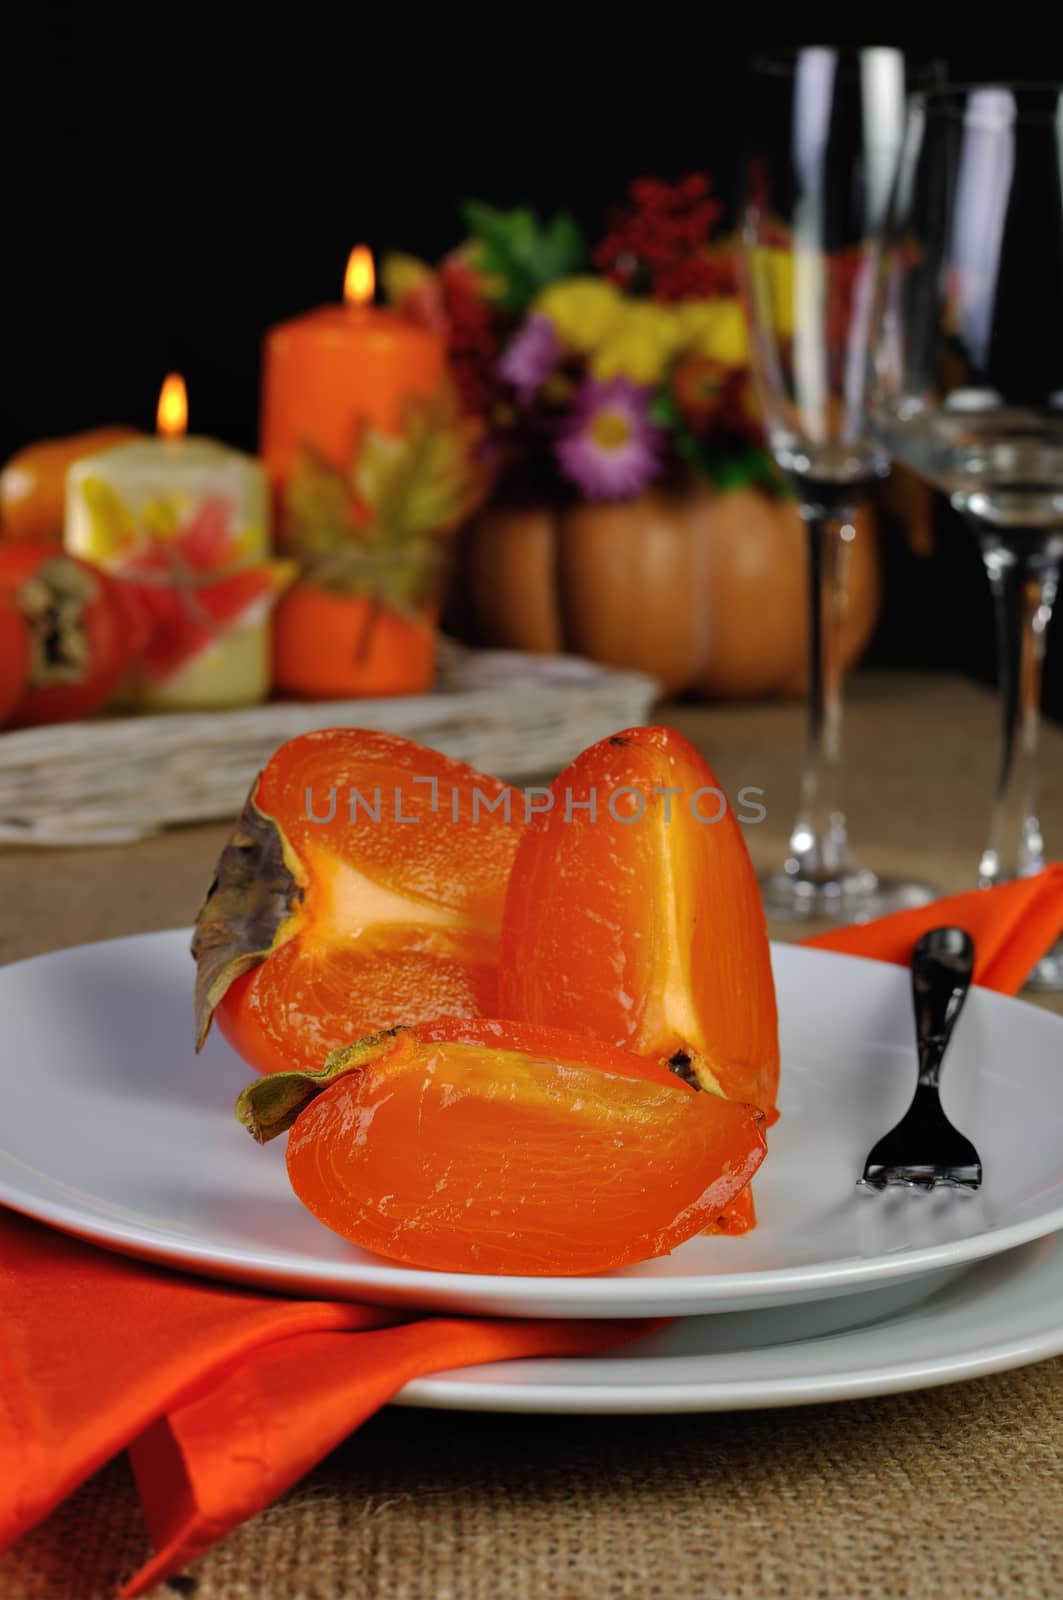 Slices of juicy ripe persimmon on a plate